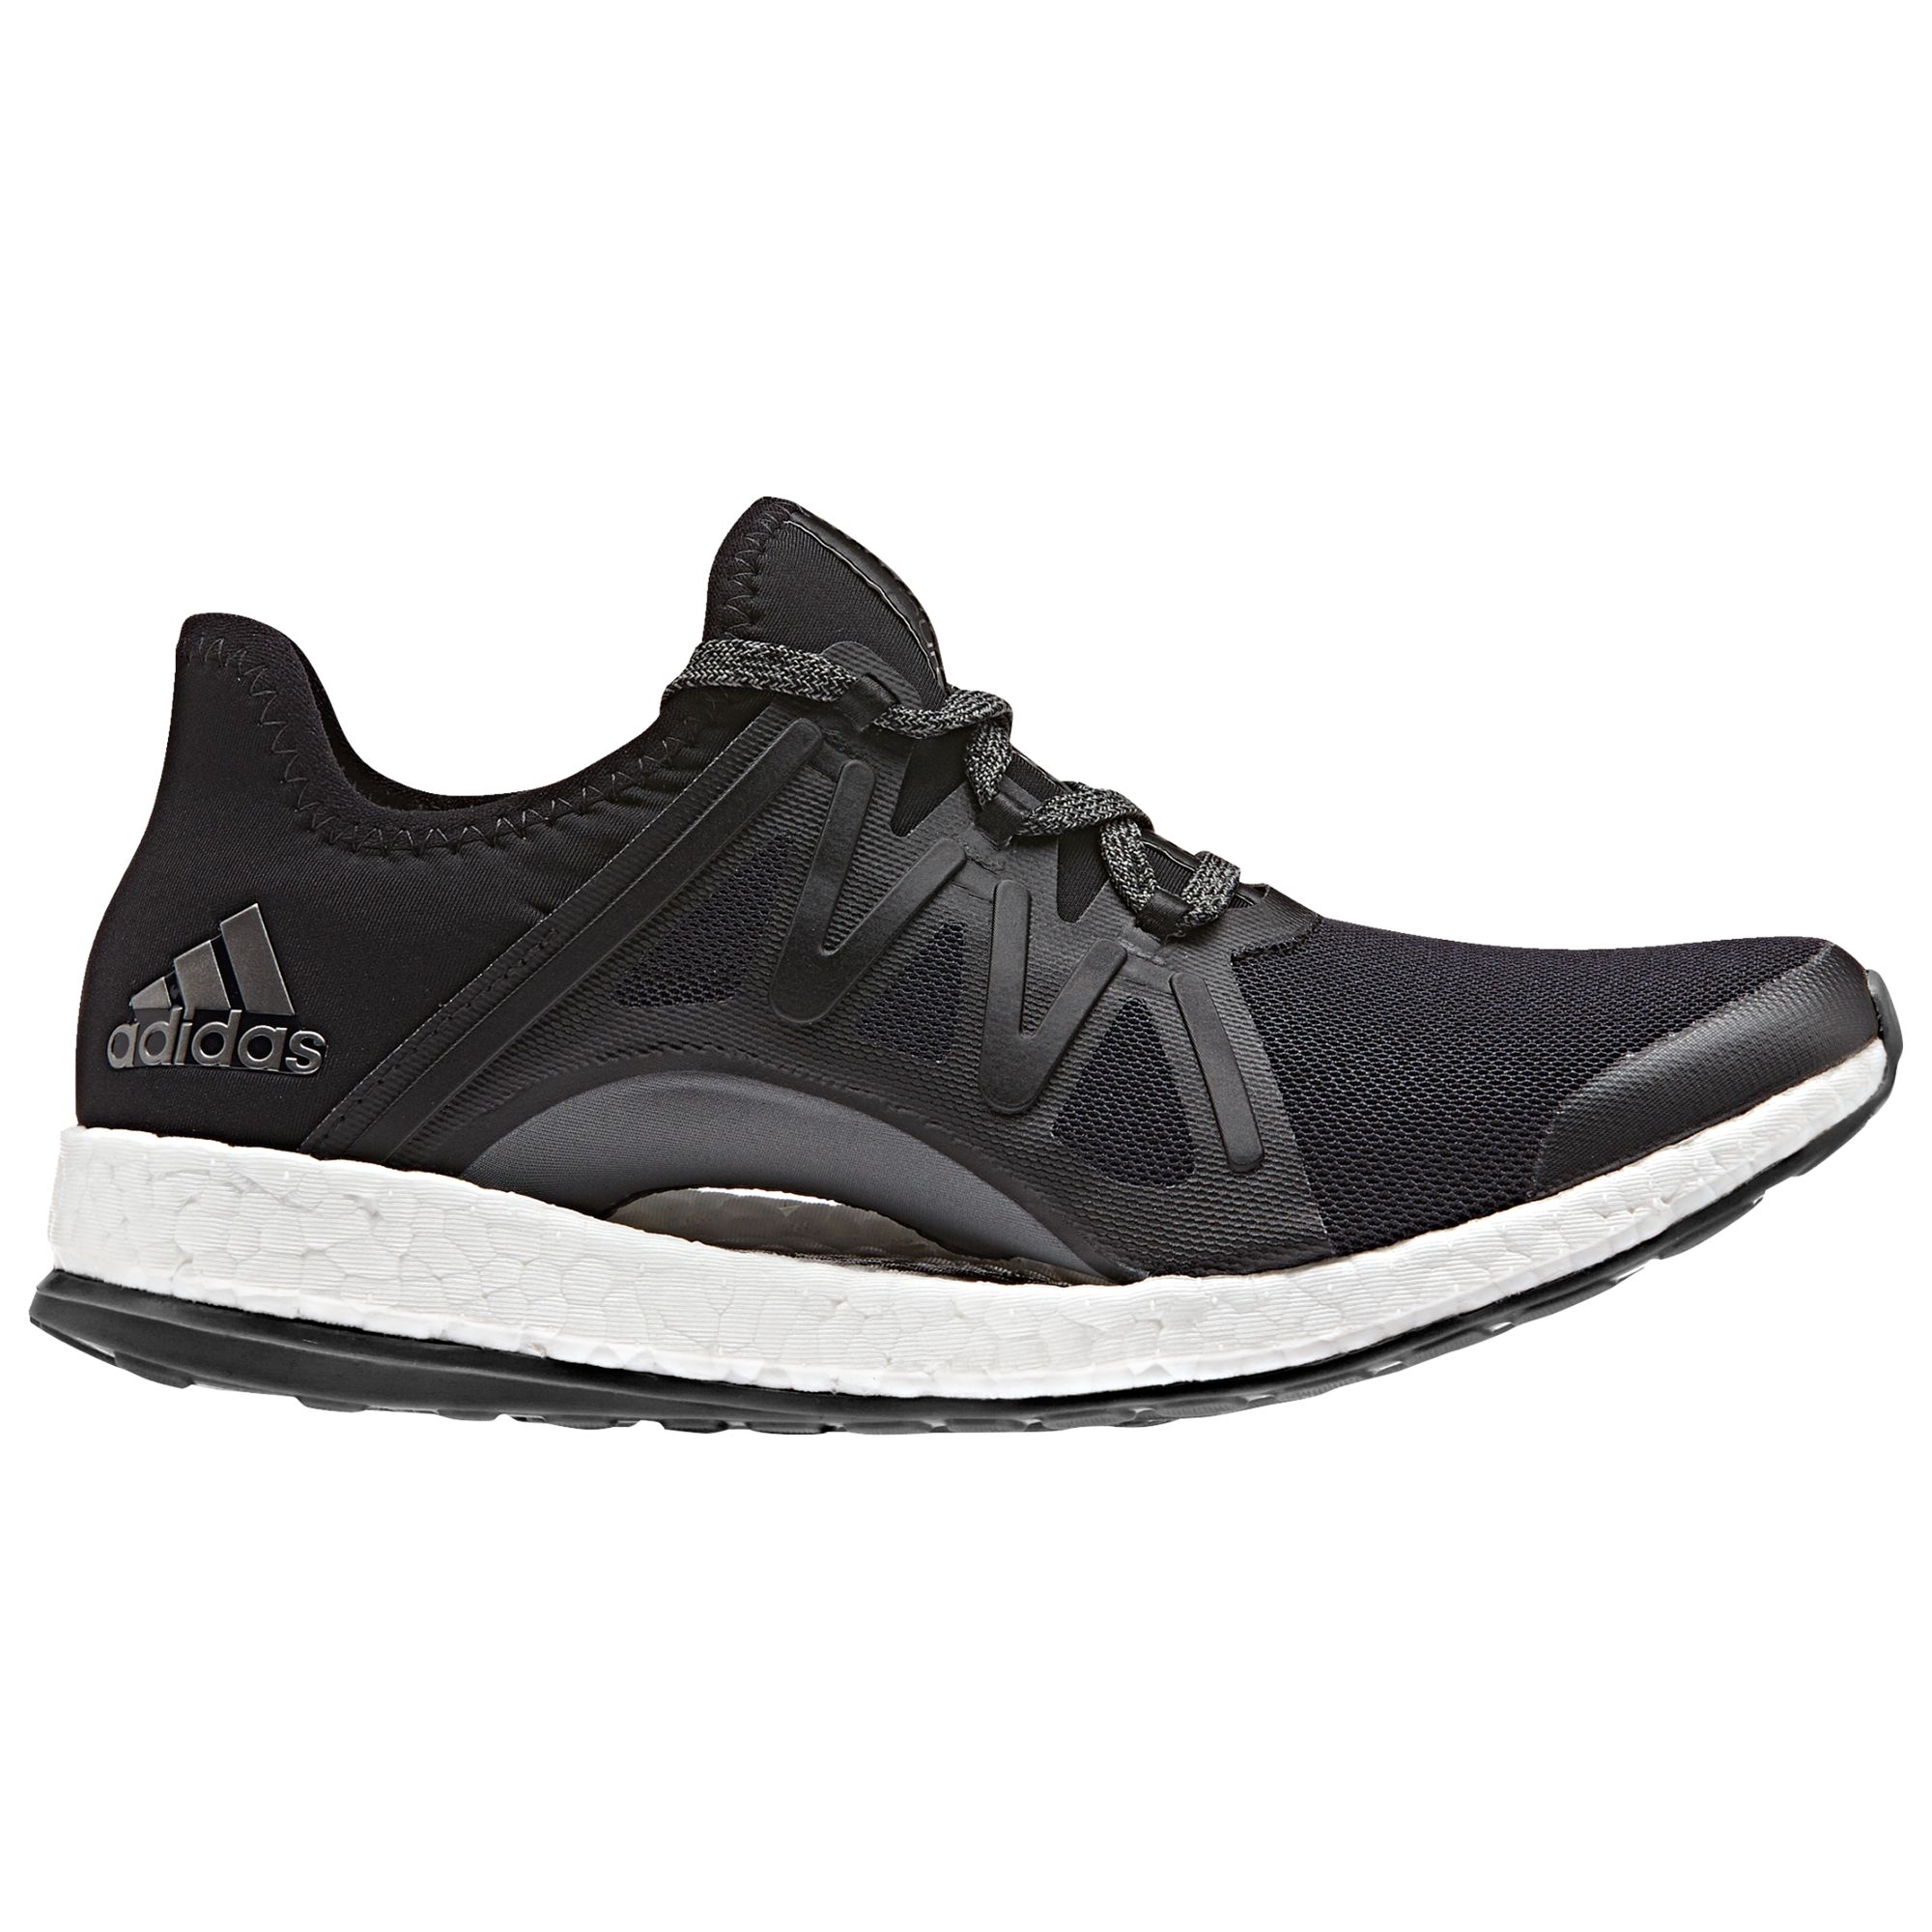 adidas pure boost xpose